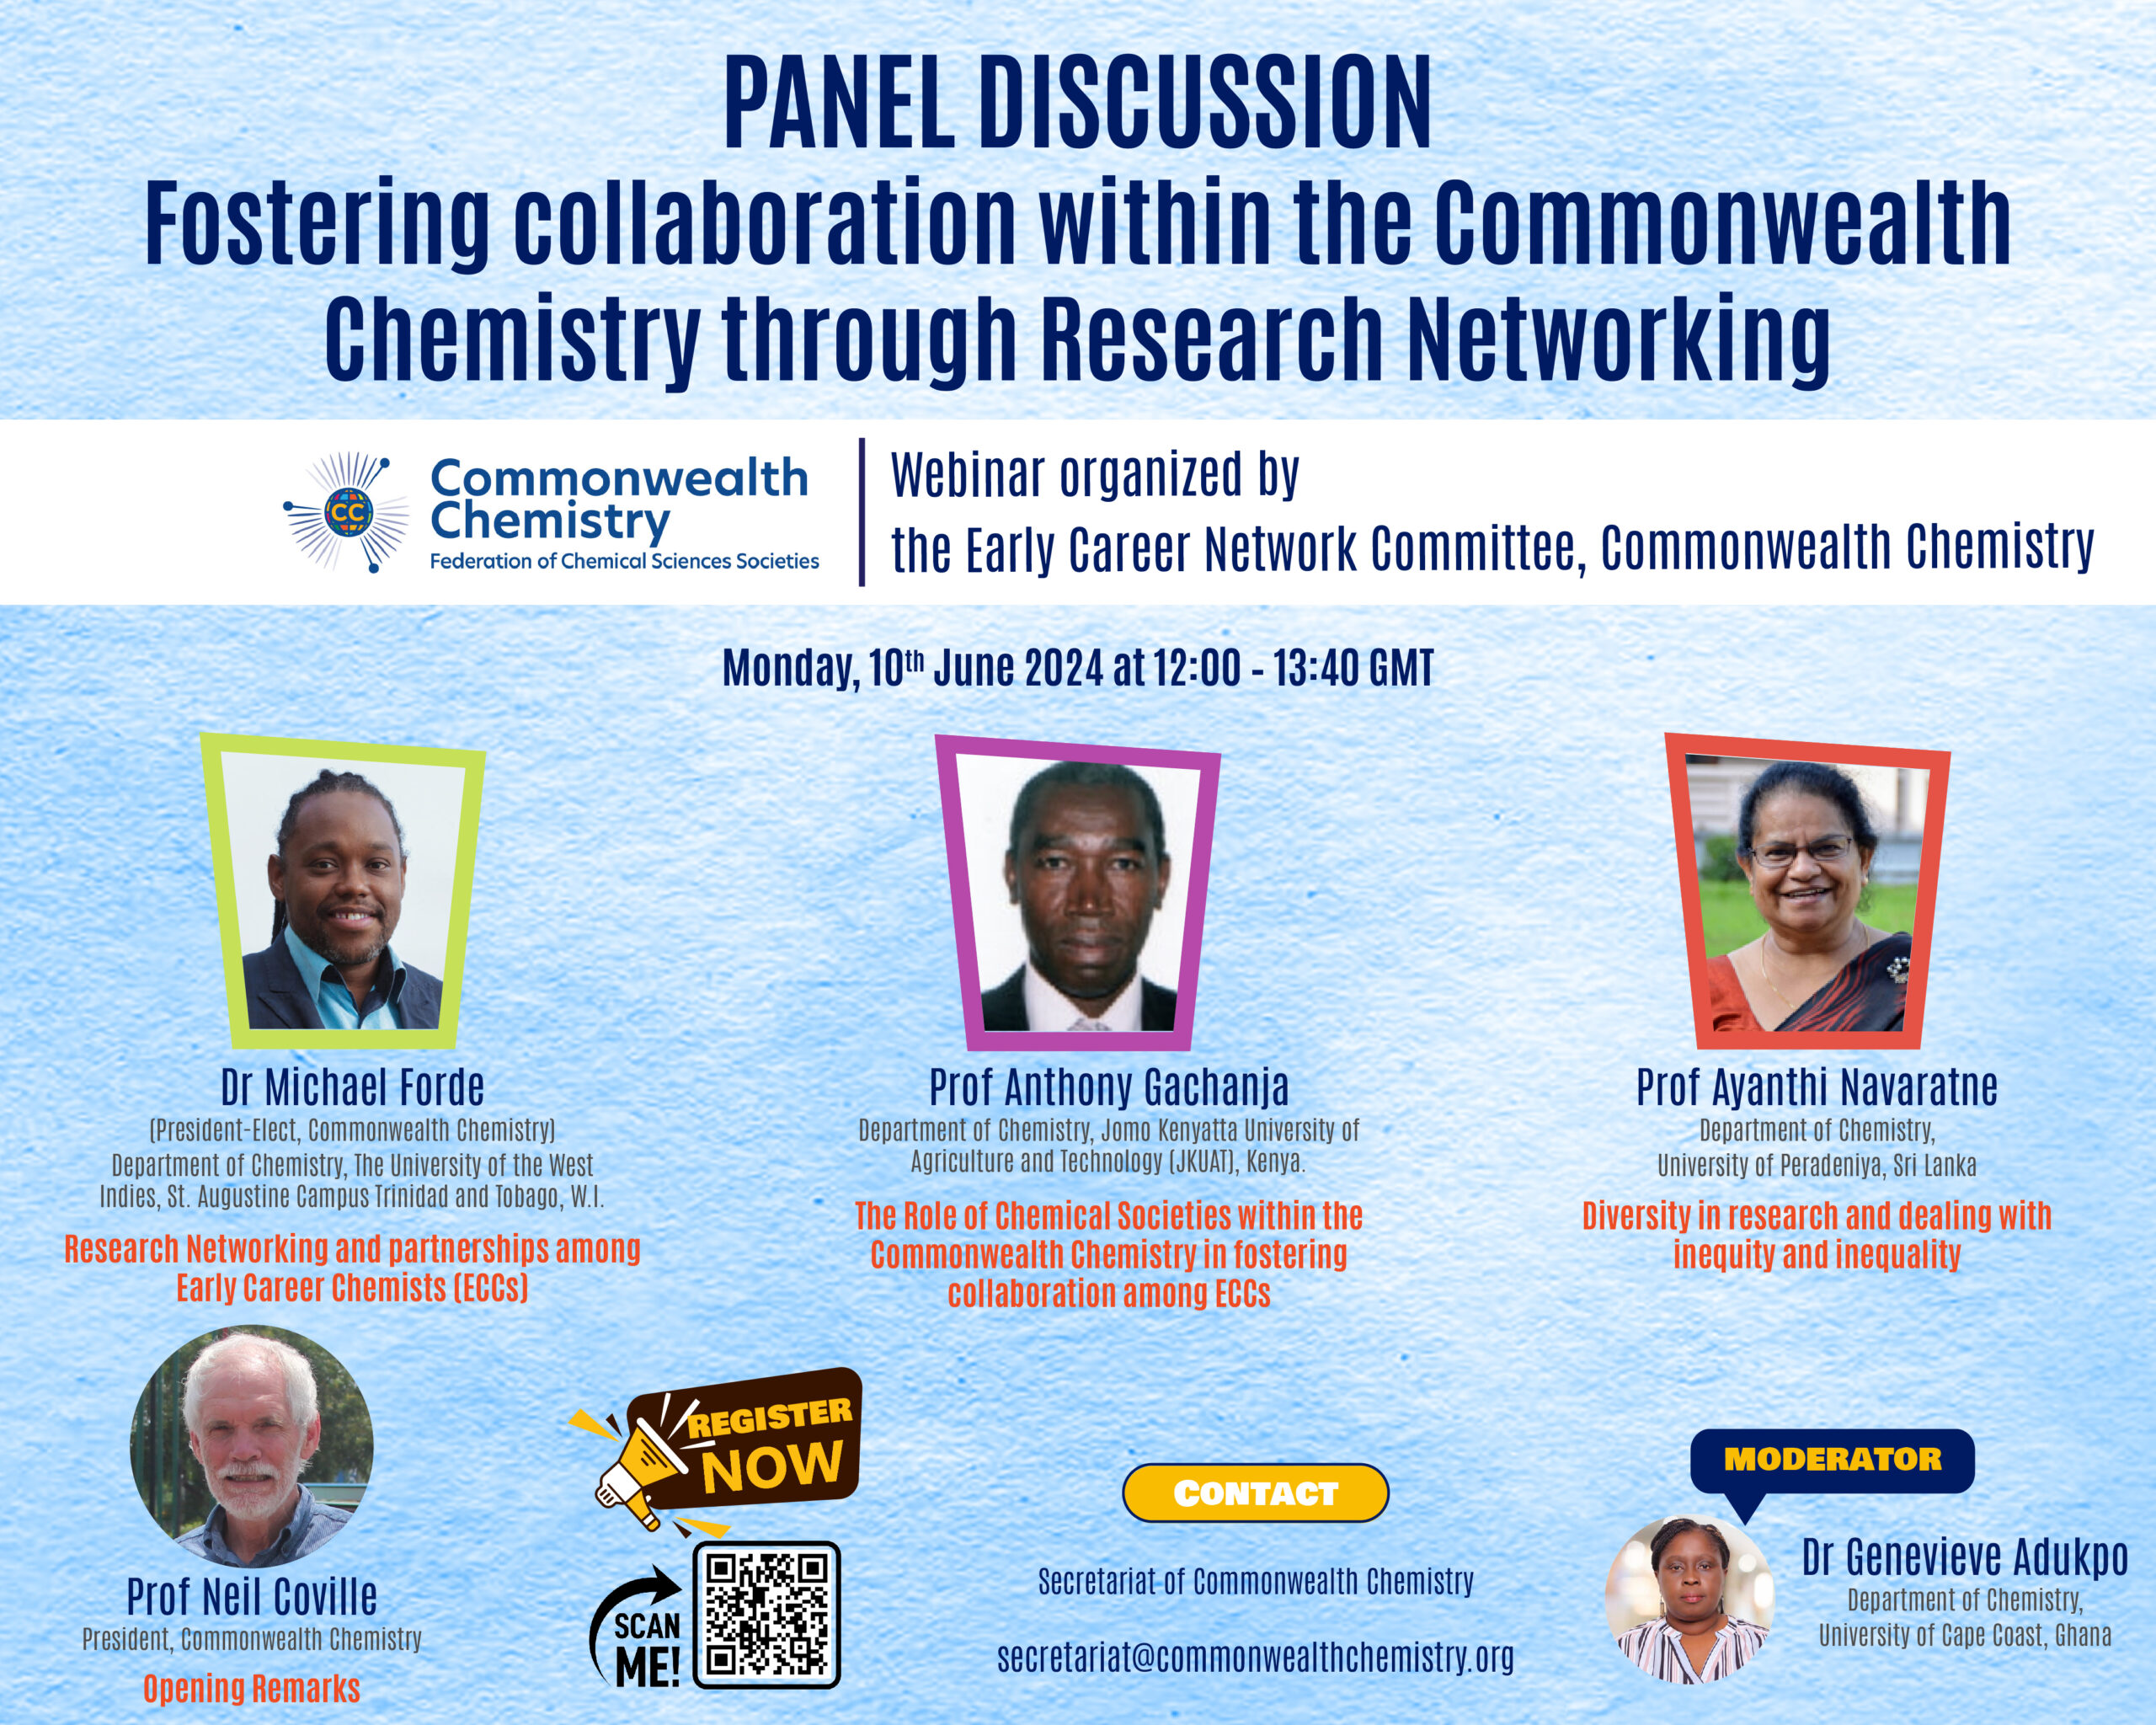 Fostering collaboration within Commonwealth Chemistry through Research Networking